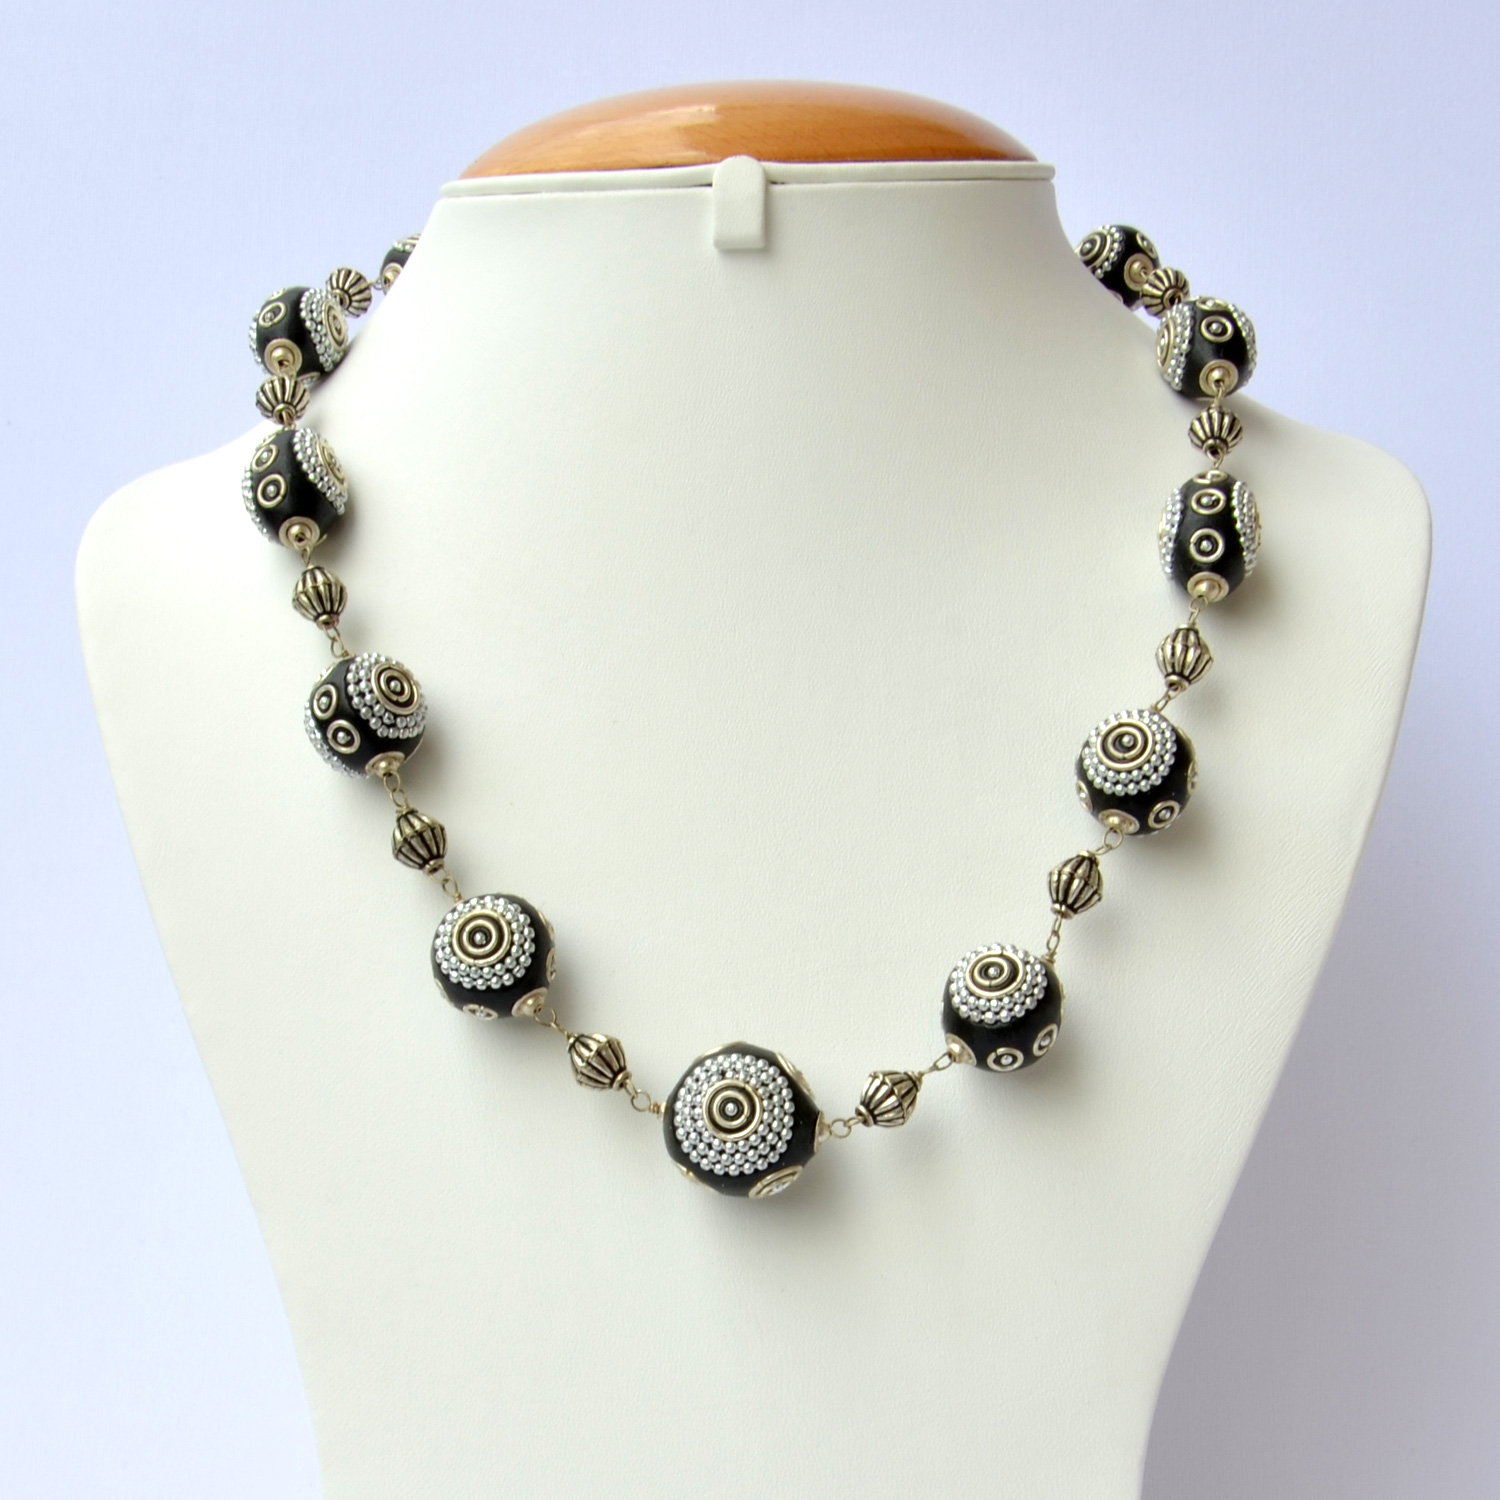 Handmade Black Necklace Studded with Silver Metal Chain | Maruti Beads